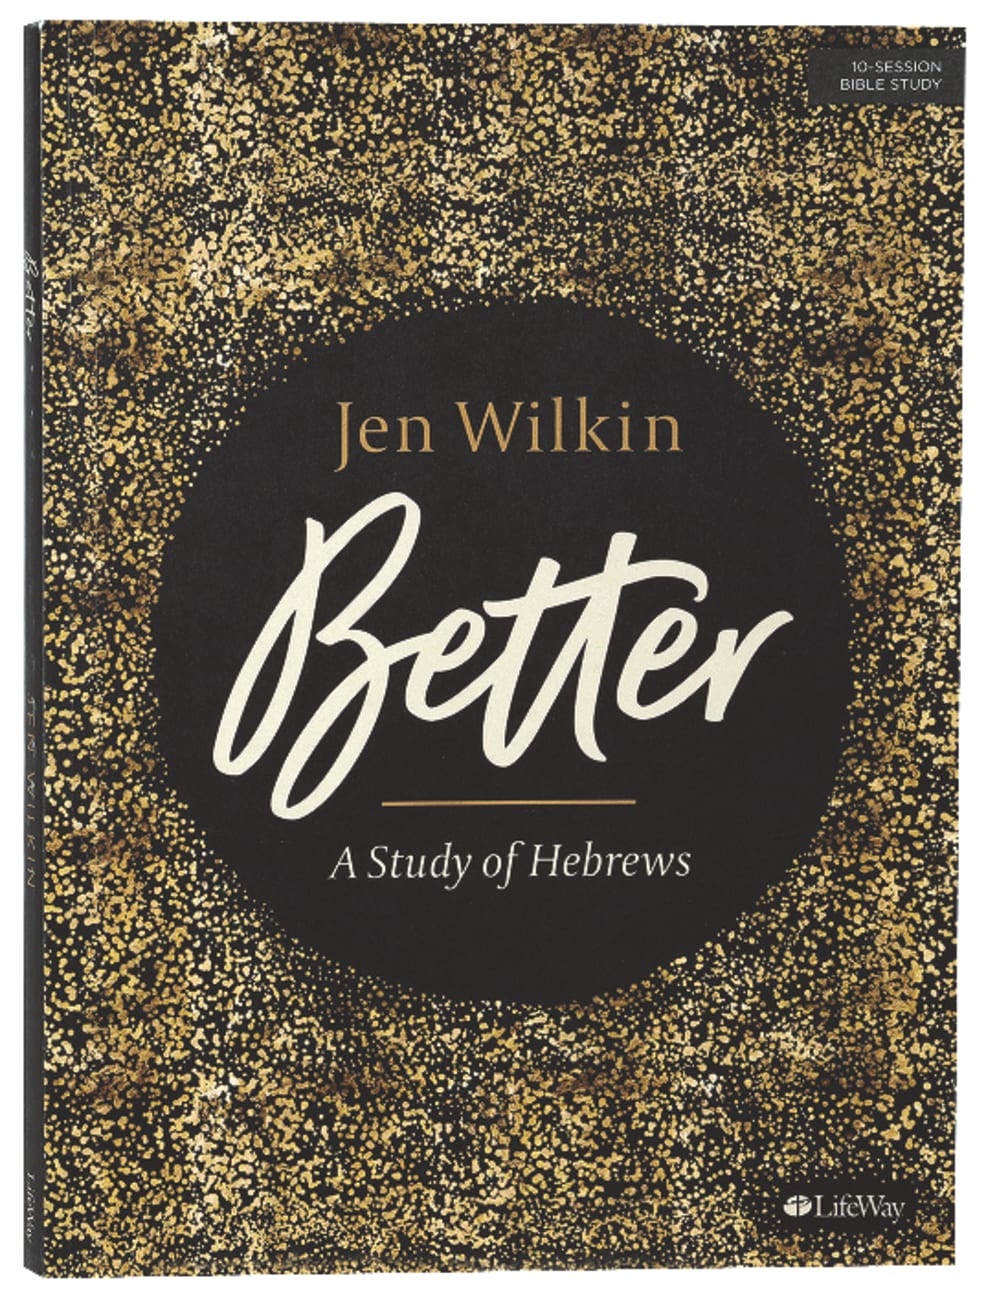 Better: A Study of Hebrews (10 Sessions) (Bible Study Book) Paperback